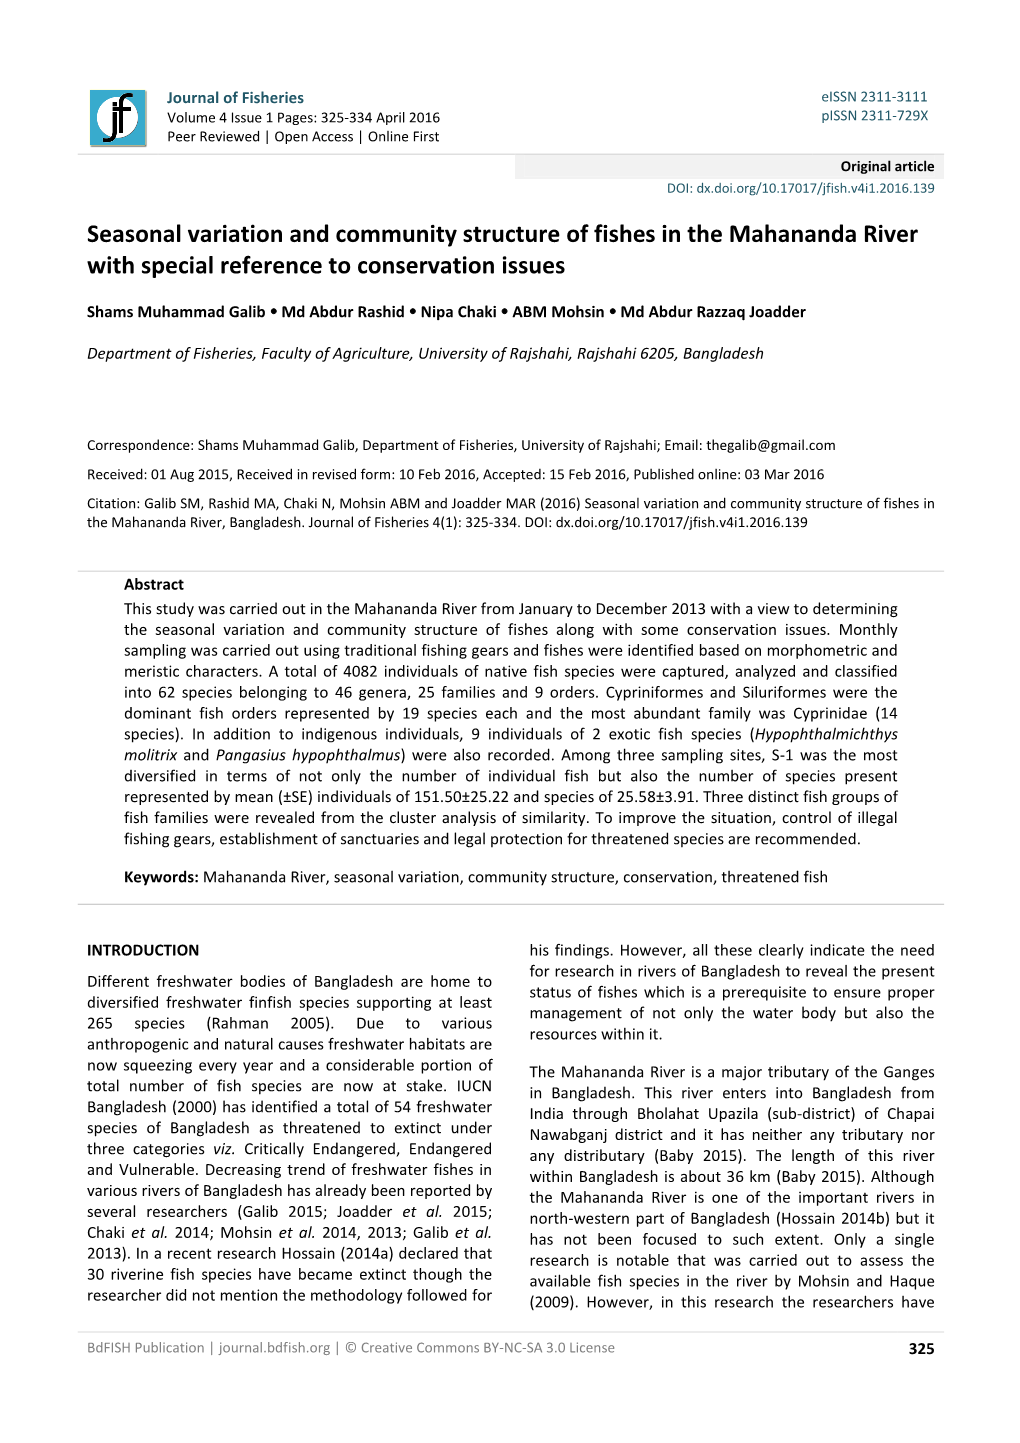 Seasonal Variation and Community Structure of Fishes in the Mahananda River with Special Reference to Conservation Issues